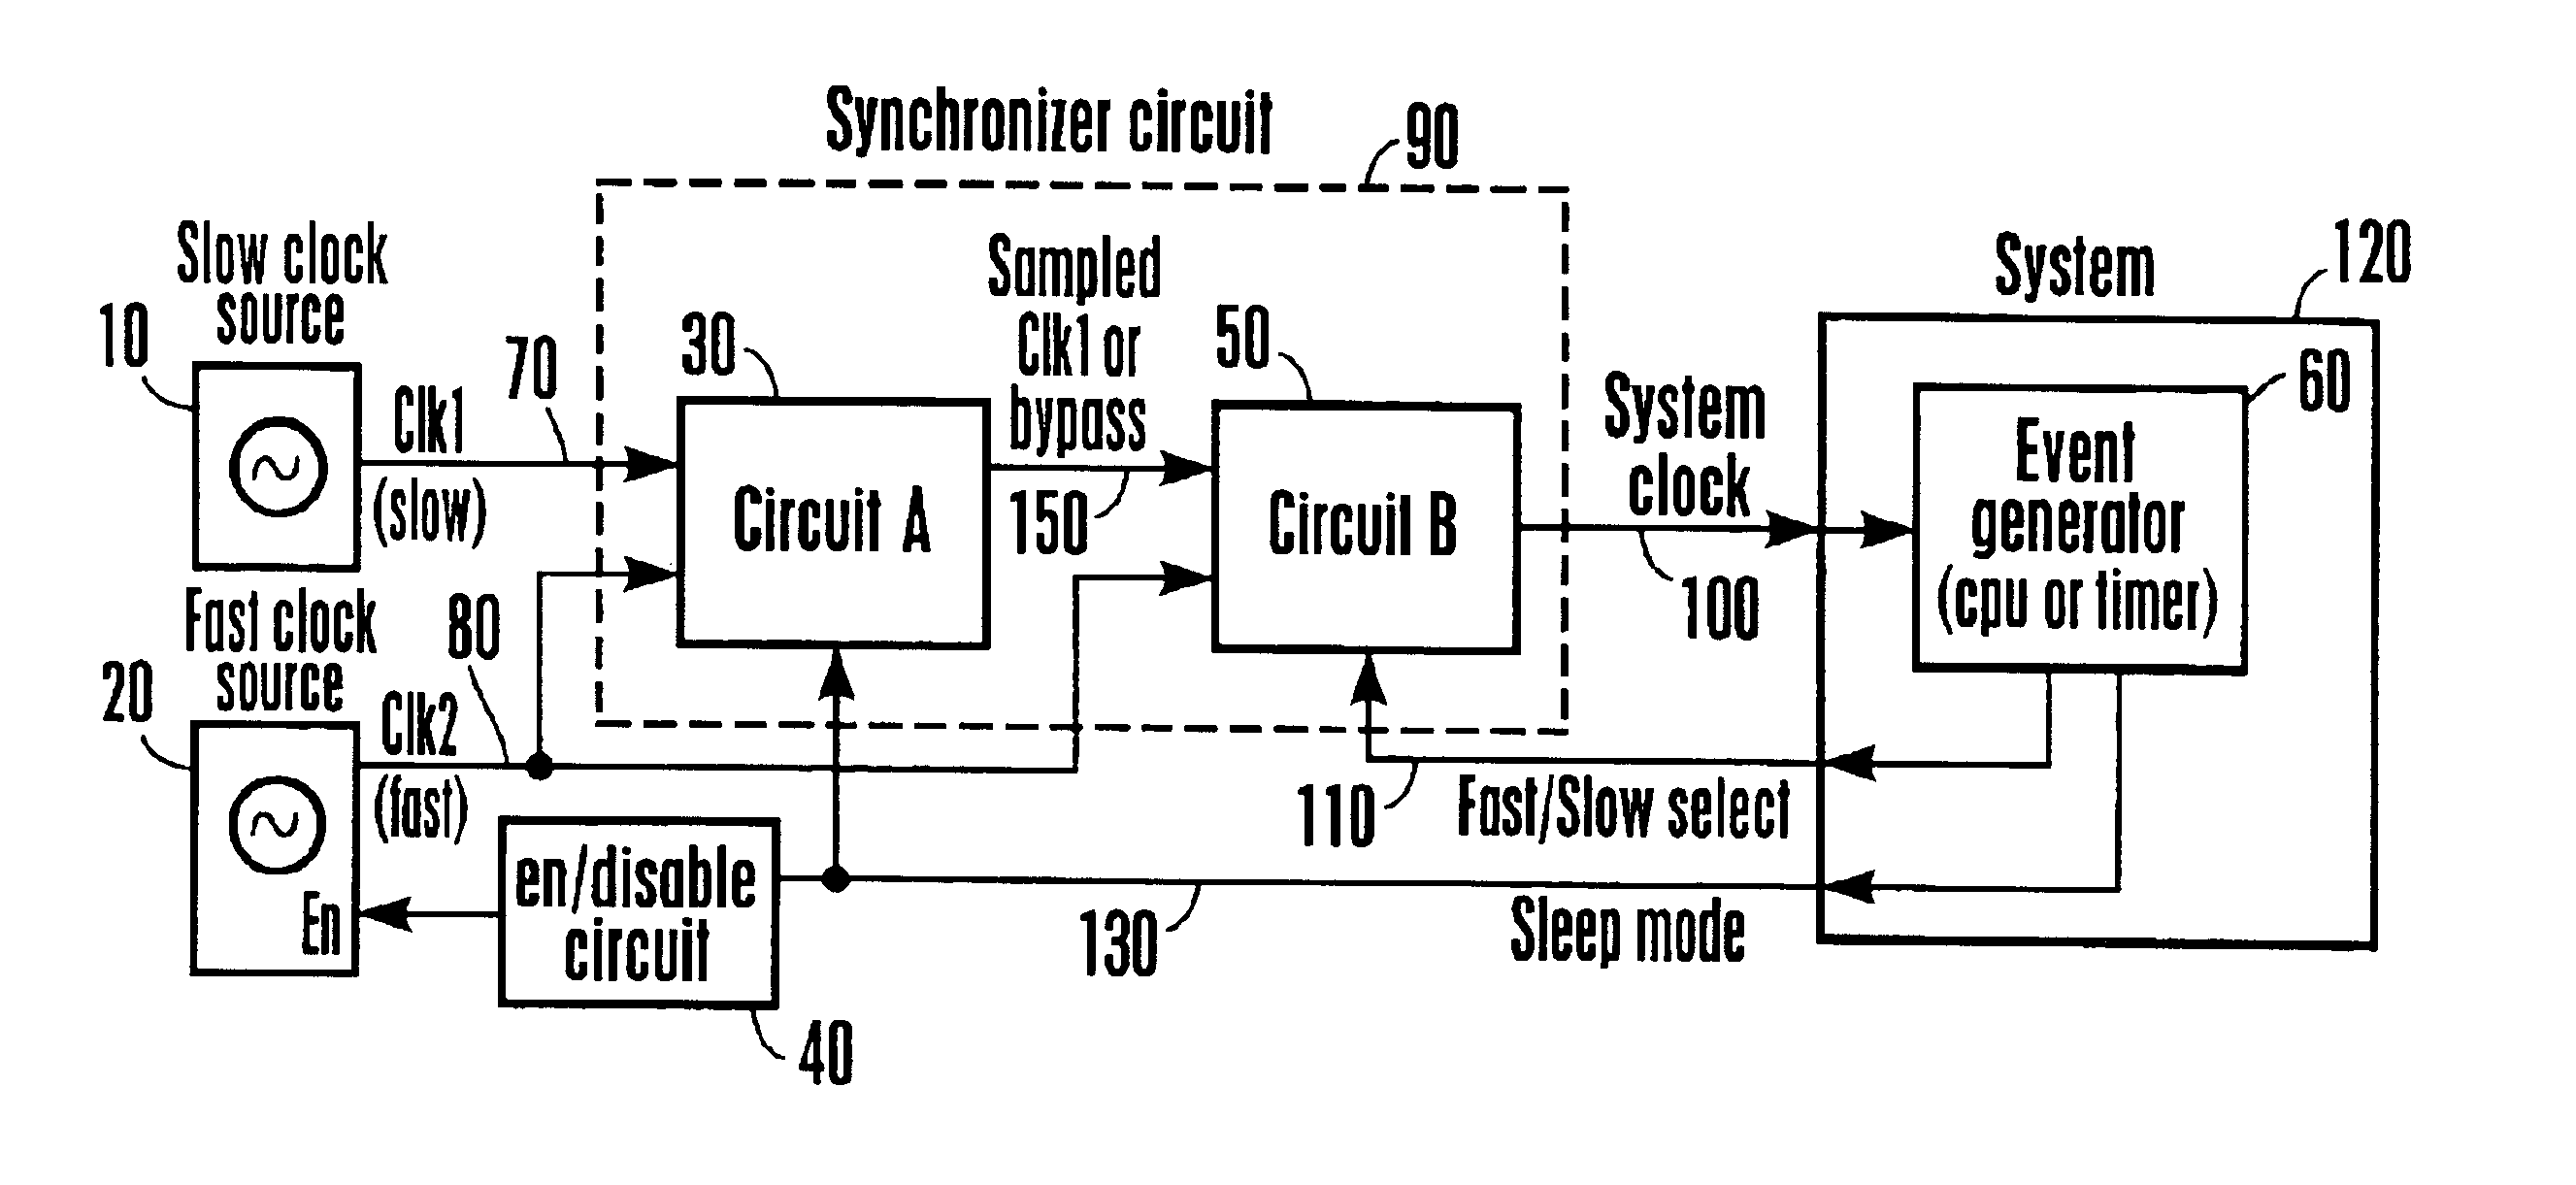 Method and apparatus for quick clock swapping using much slower asynchronous clock for power savings